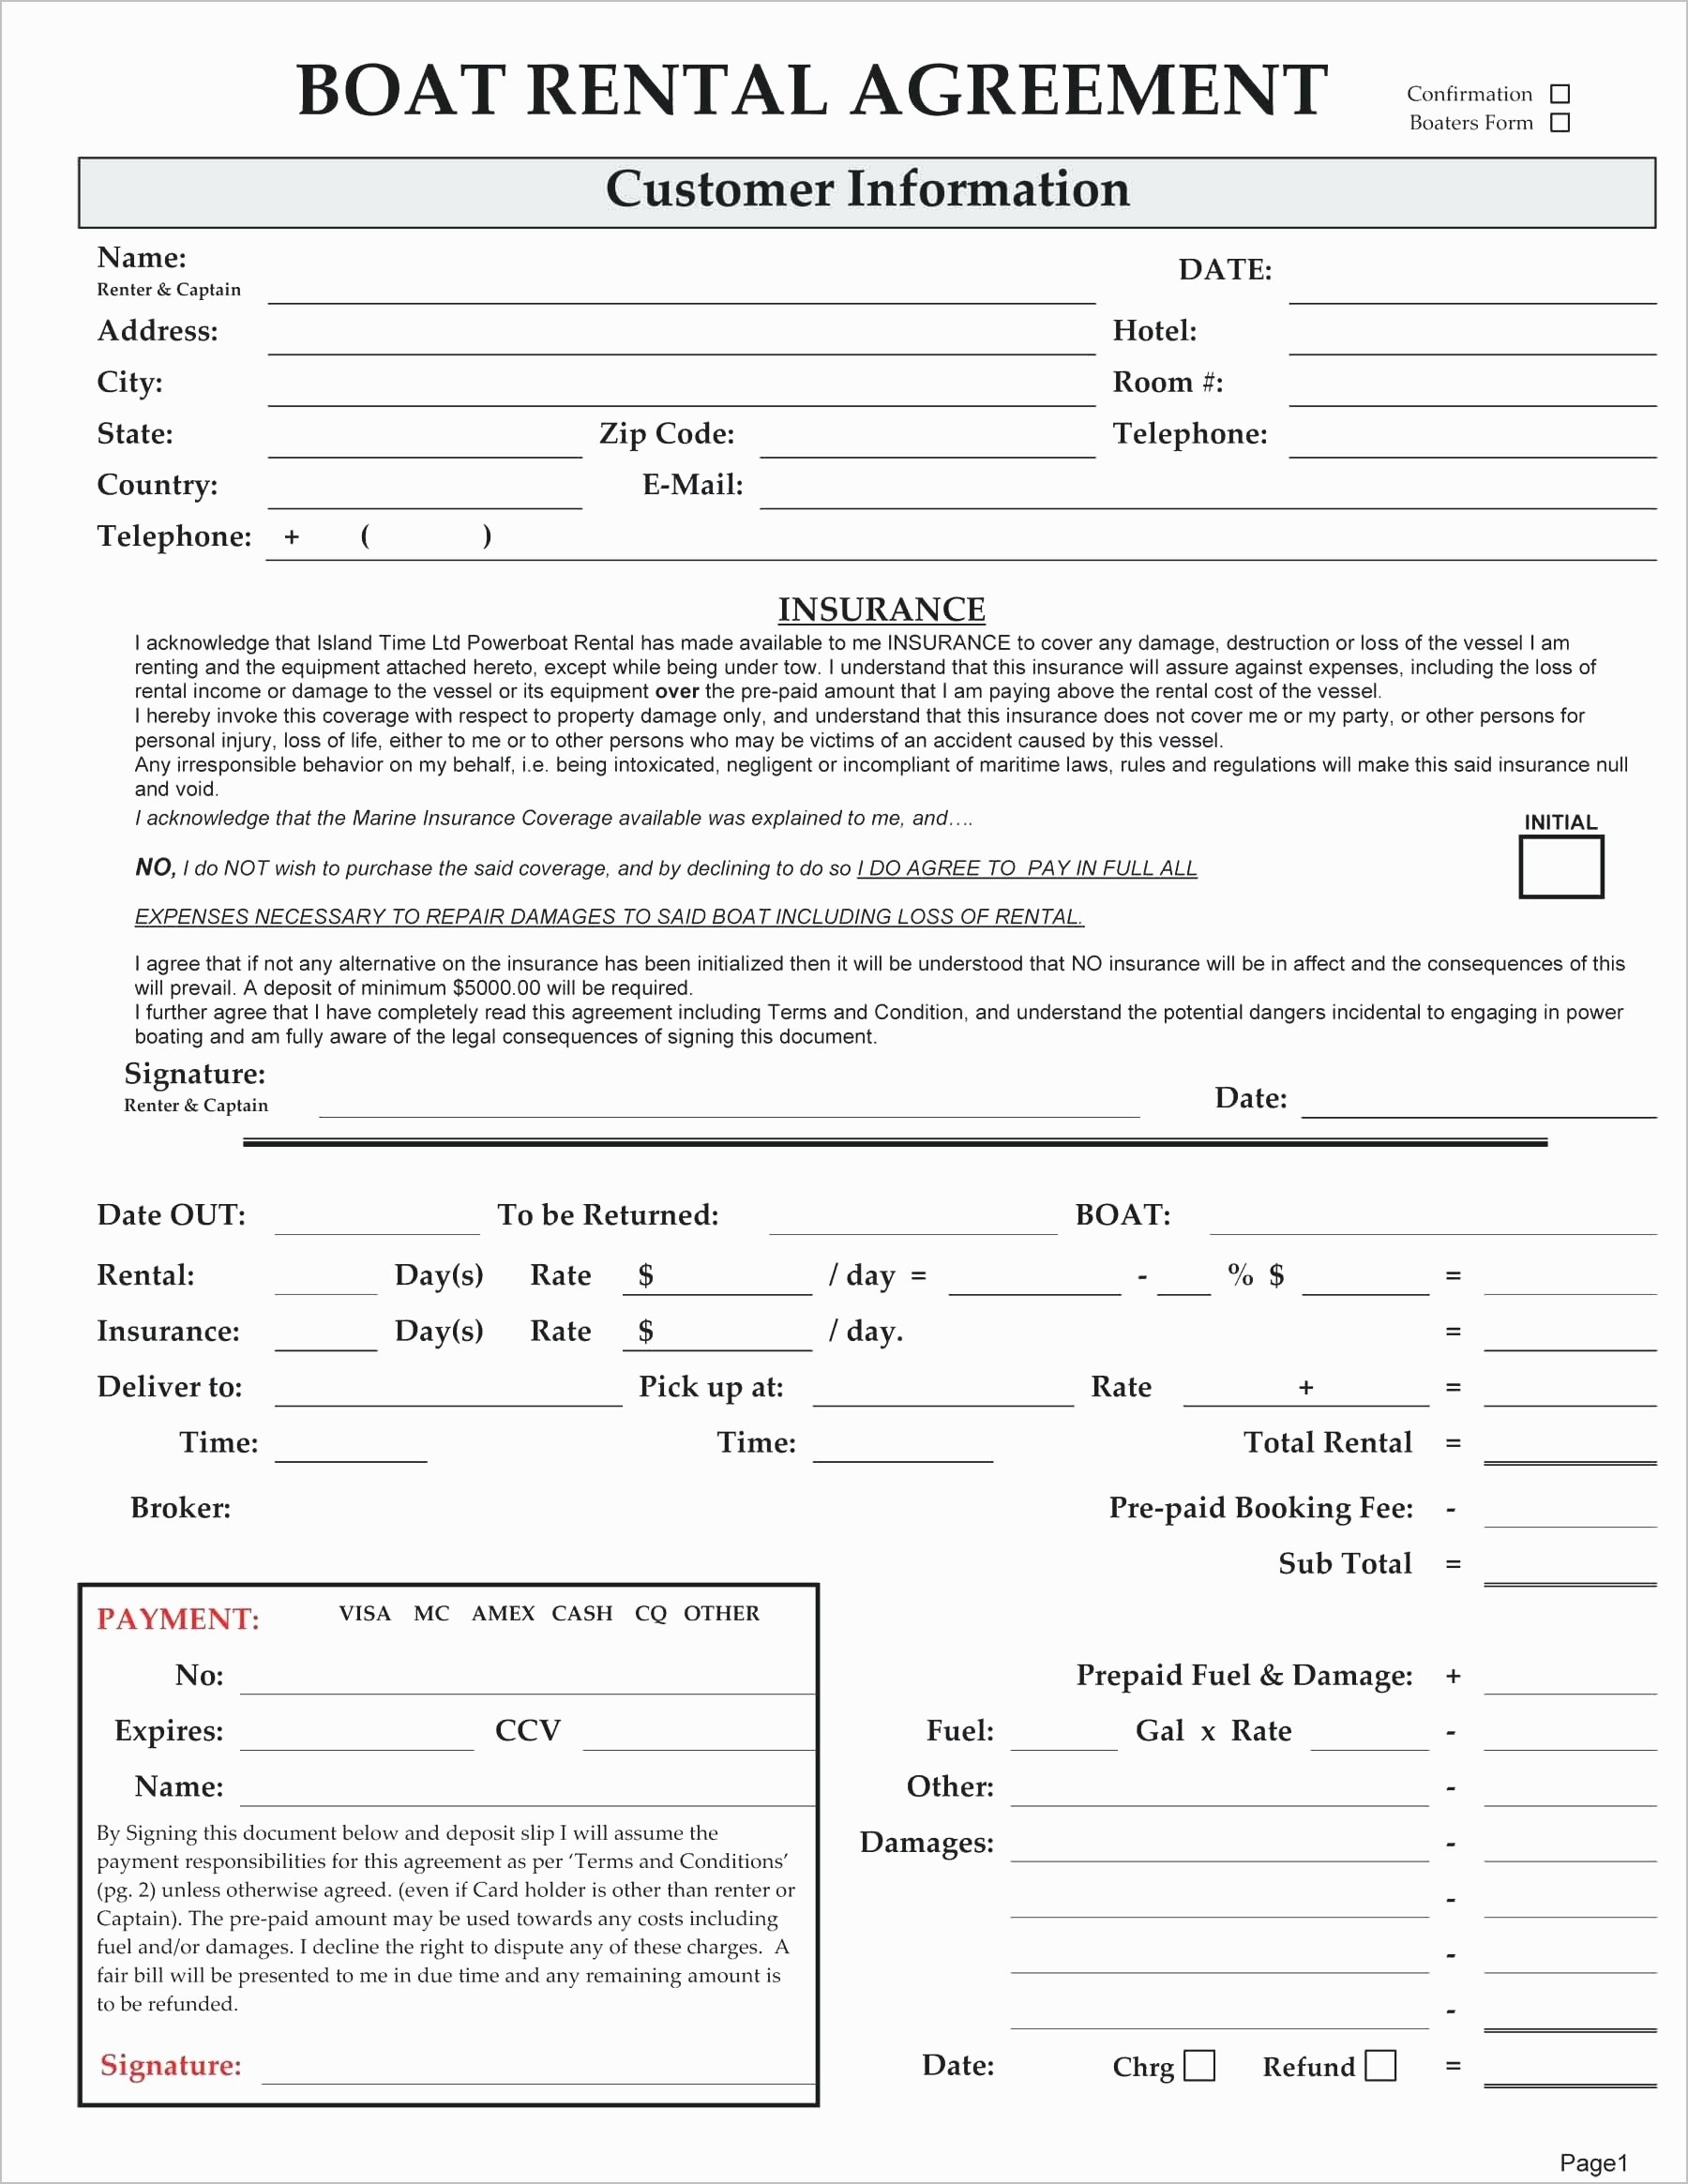 Boat Rental Agreement Template Best Of Document